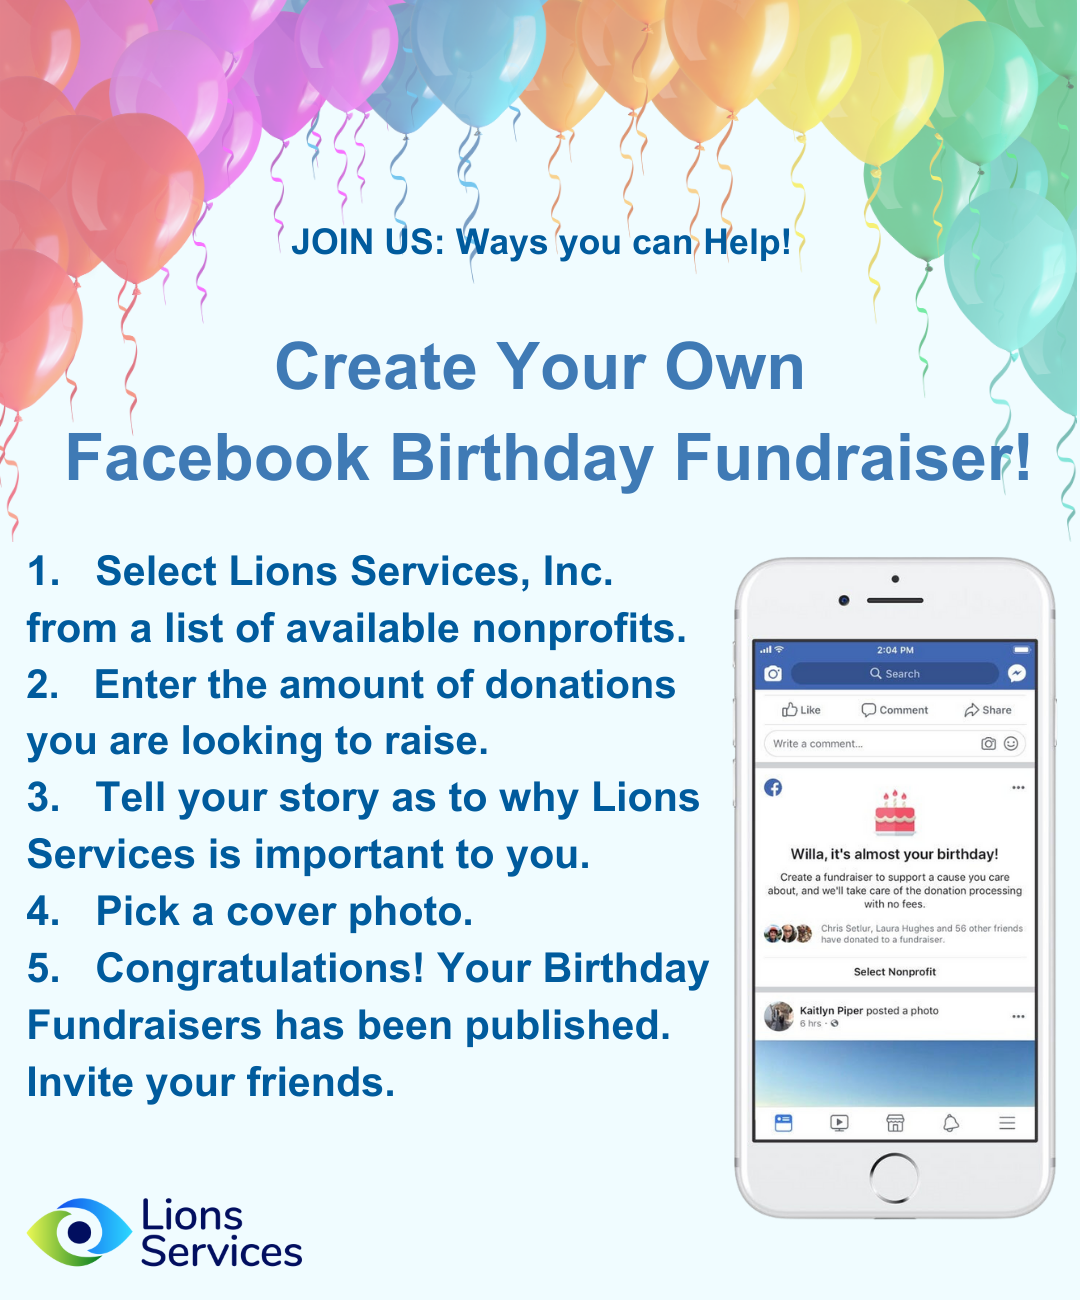 Image with Balloon Border: JOIN US: Ways you can Help! Create Your Own Facebook Birthday Fundraiser! 1. Select Lions Services, Inc. from a list of available nonprofits. 2. Enter the amount of donations you are looking to raise. 3. Tell your story as to why Lions Services is important to you. 4. Pick a cover photo. 5. Congratulations! Your Birthday Fundraisers has been published. Invite your friends. A photo shows you selecting a nonprofit of your choosing.